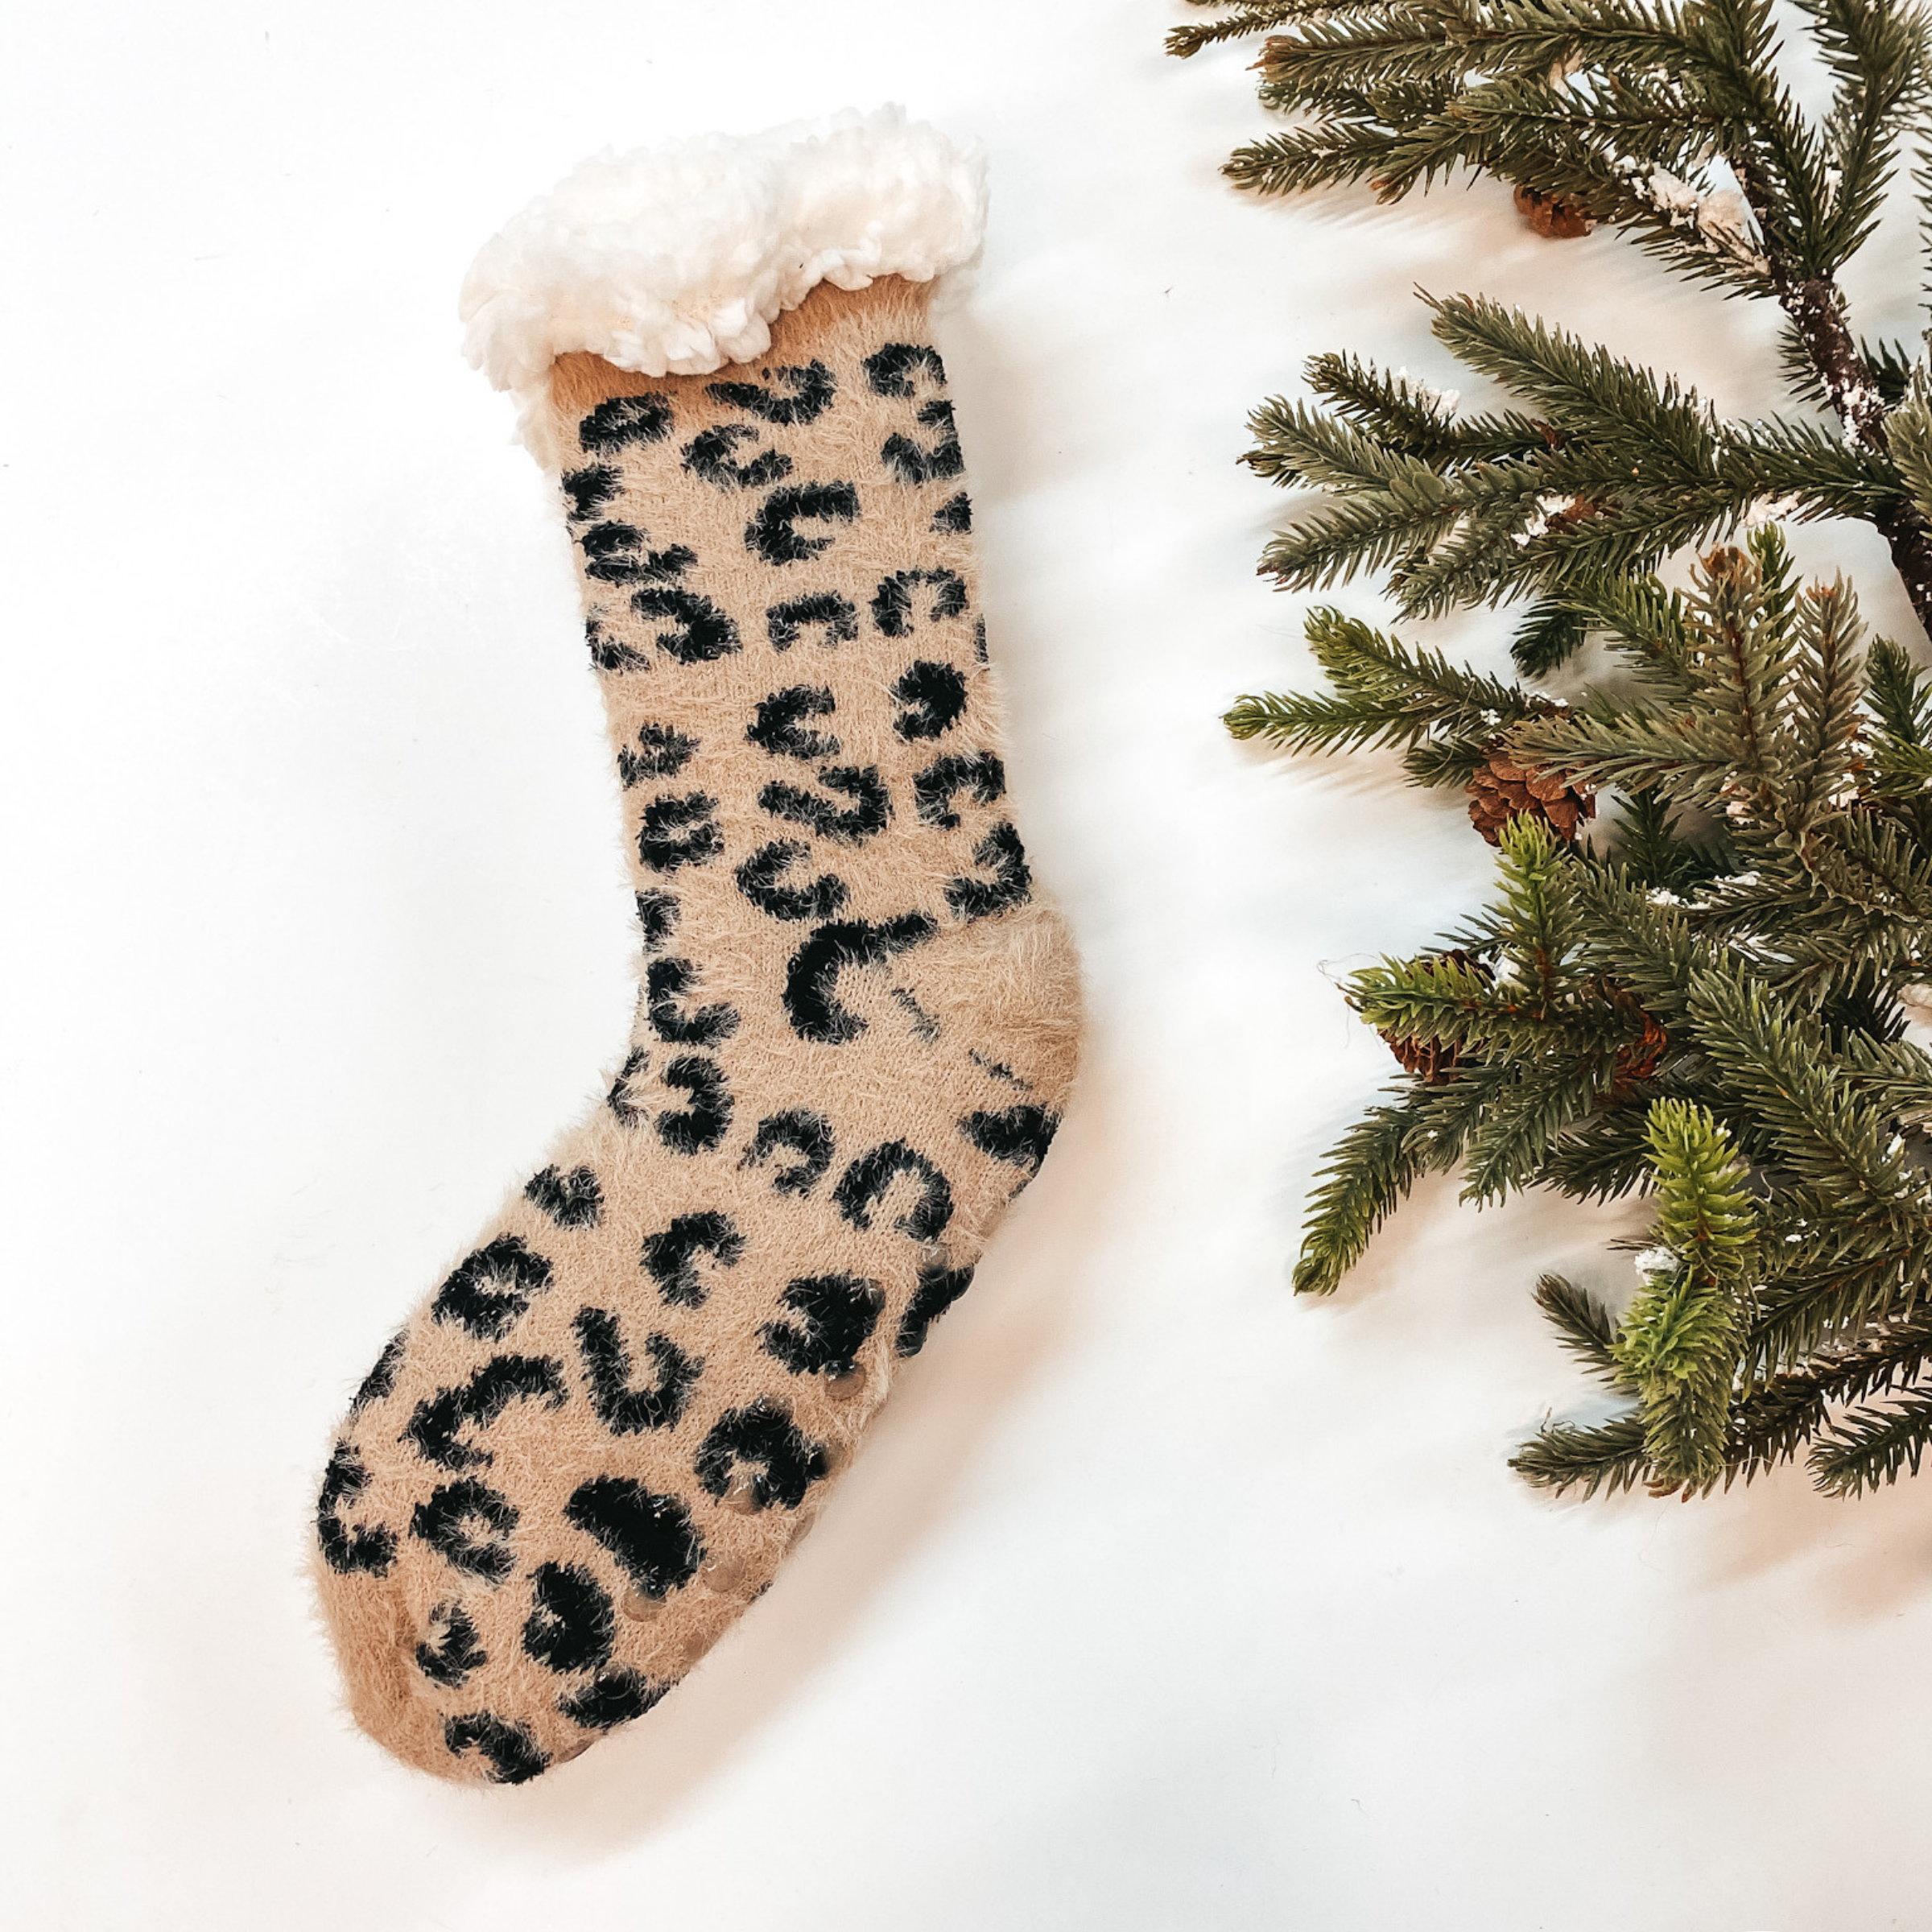 Fuzzy Sherpa Socks in Tan Leopard - Giddy Up Glamour Boutique